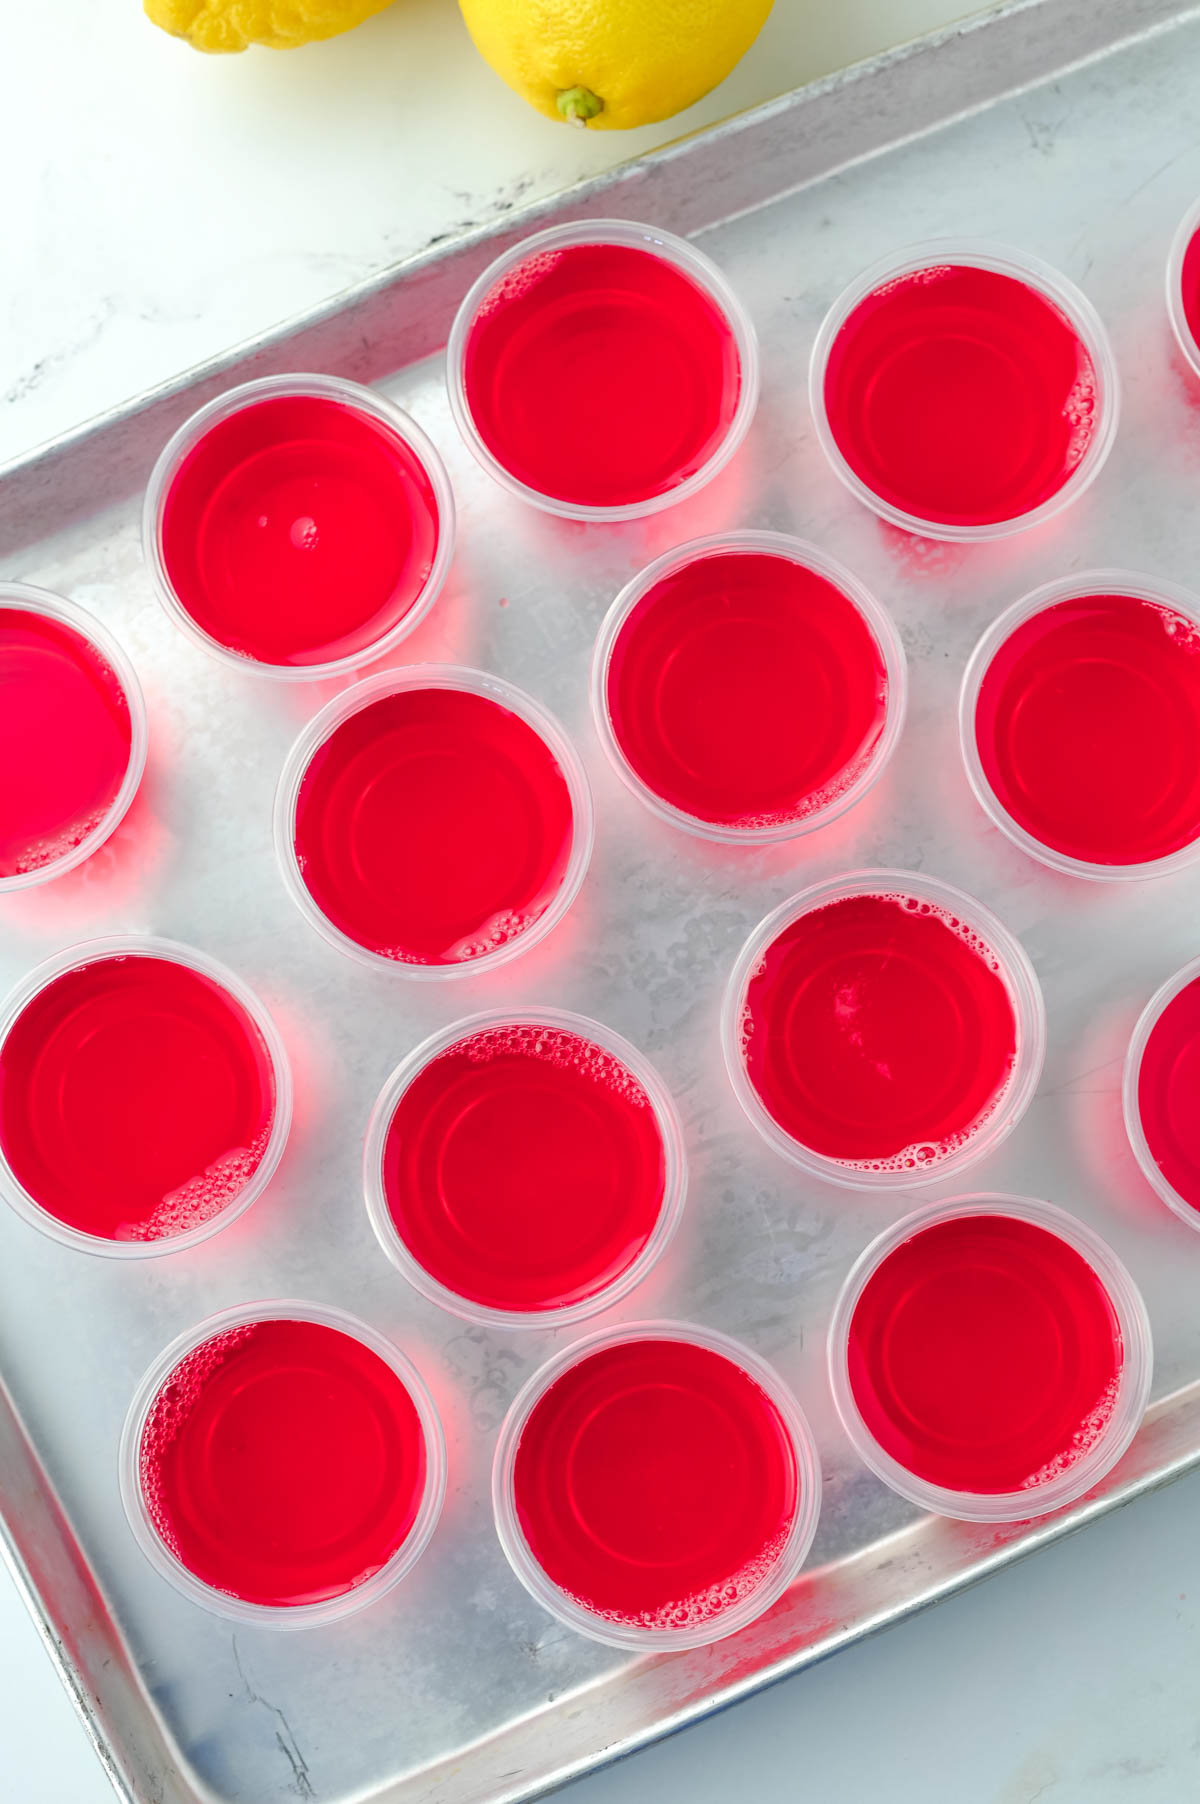 A tray full of red jello shots on a baking sheet.